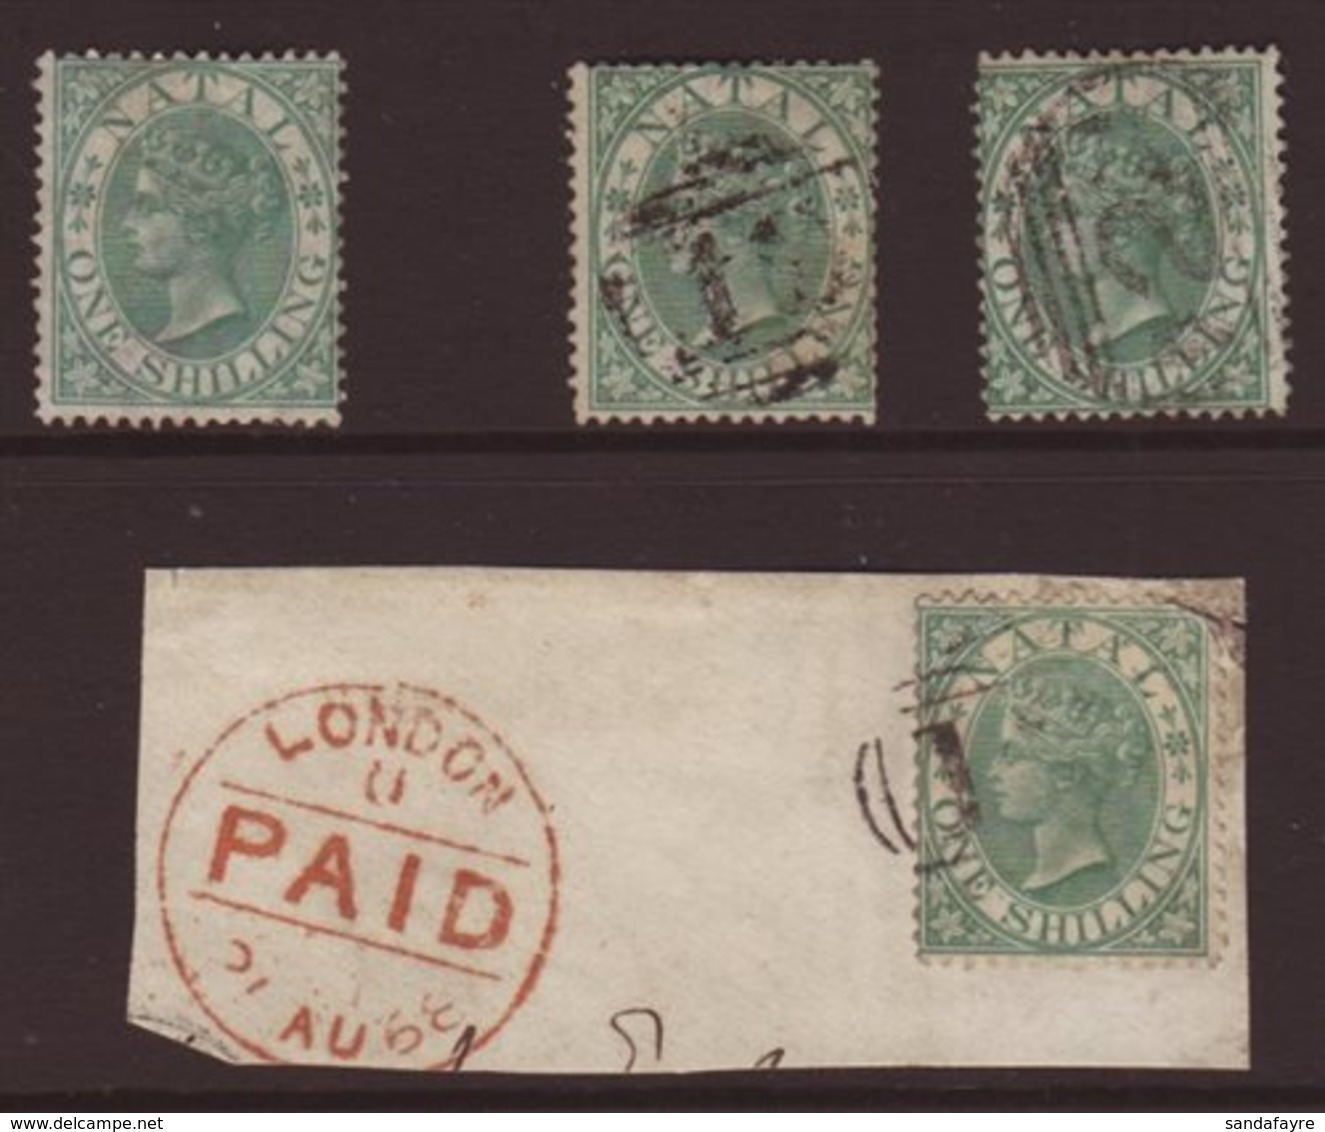 NATAL  1867 1s Green SG 25, A Fresh Unused Example, And Three Used (one On Piece) Displaying Numeral Cancels. (4 Stamps) - Unclassified